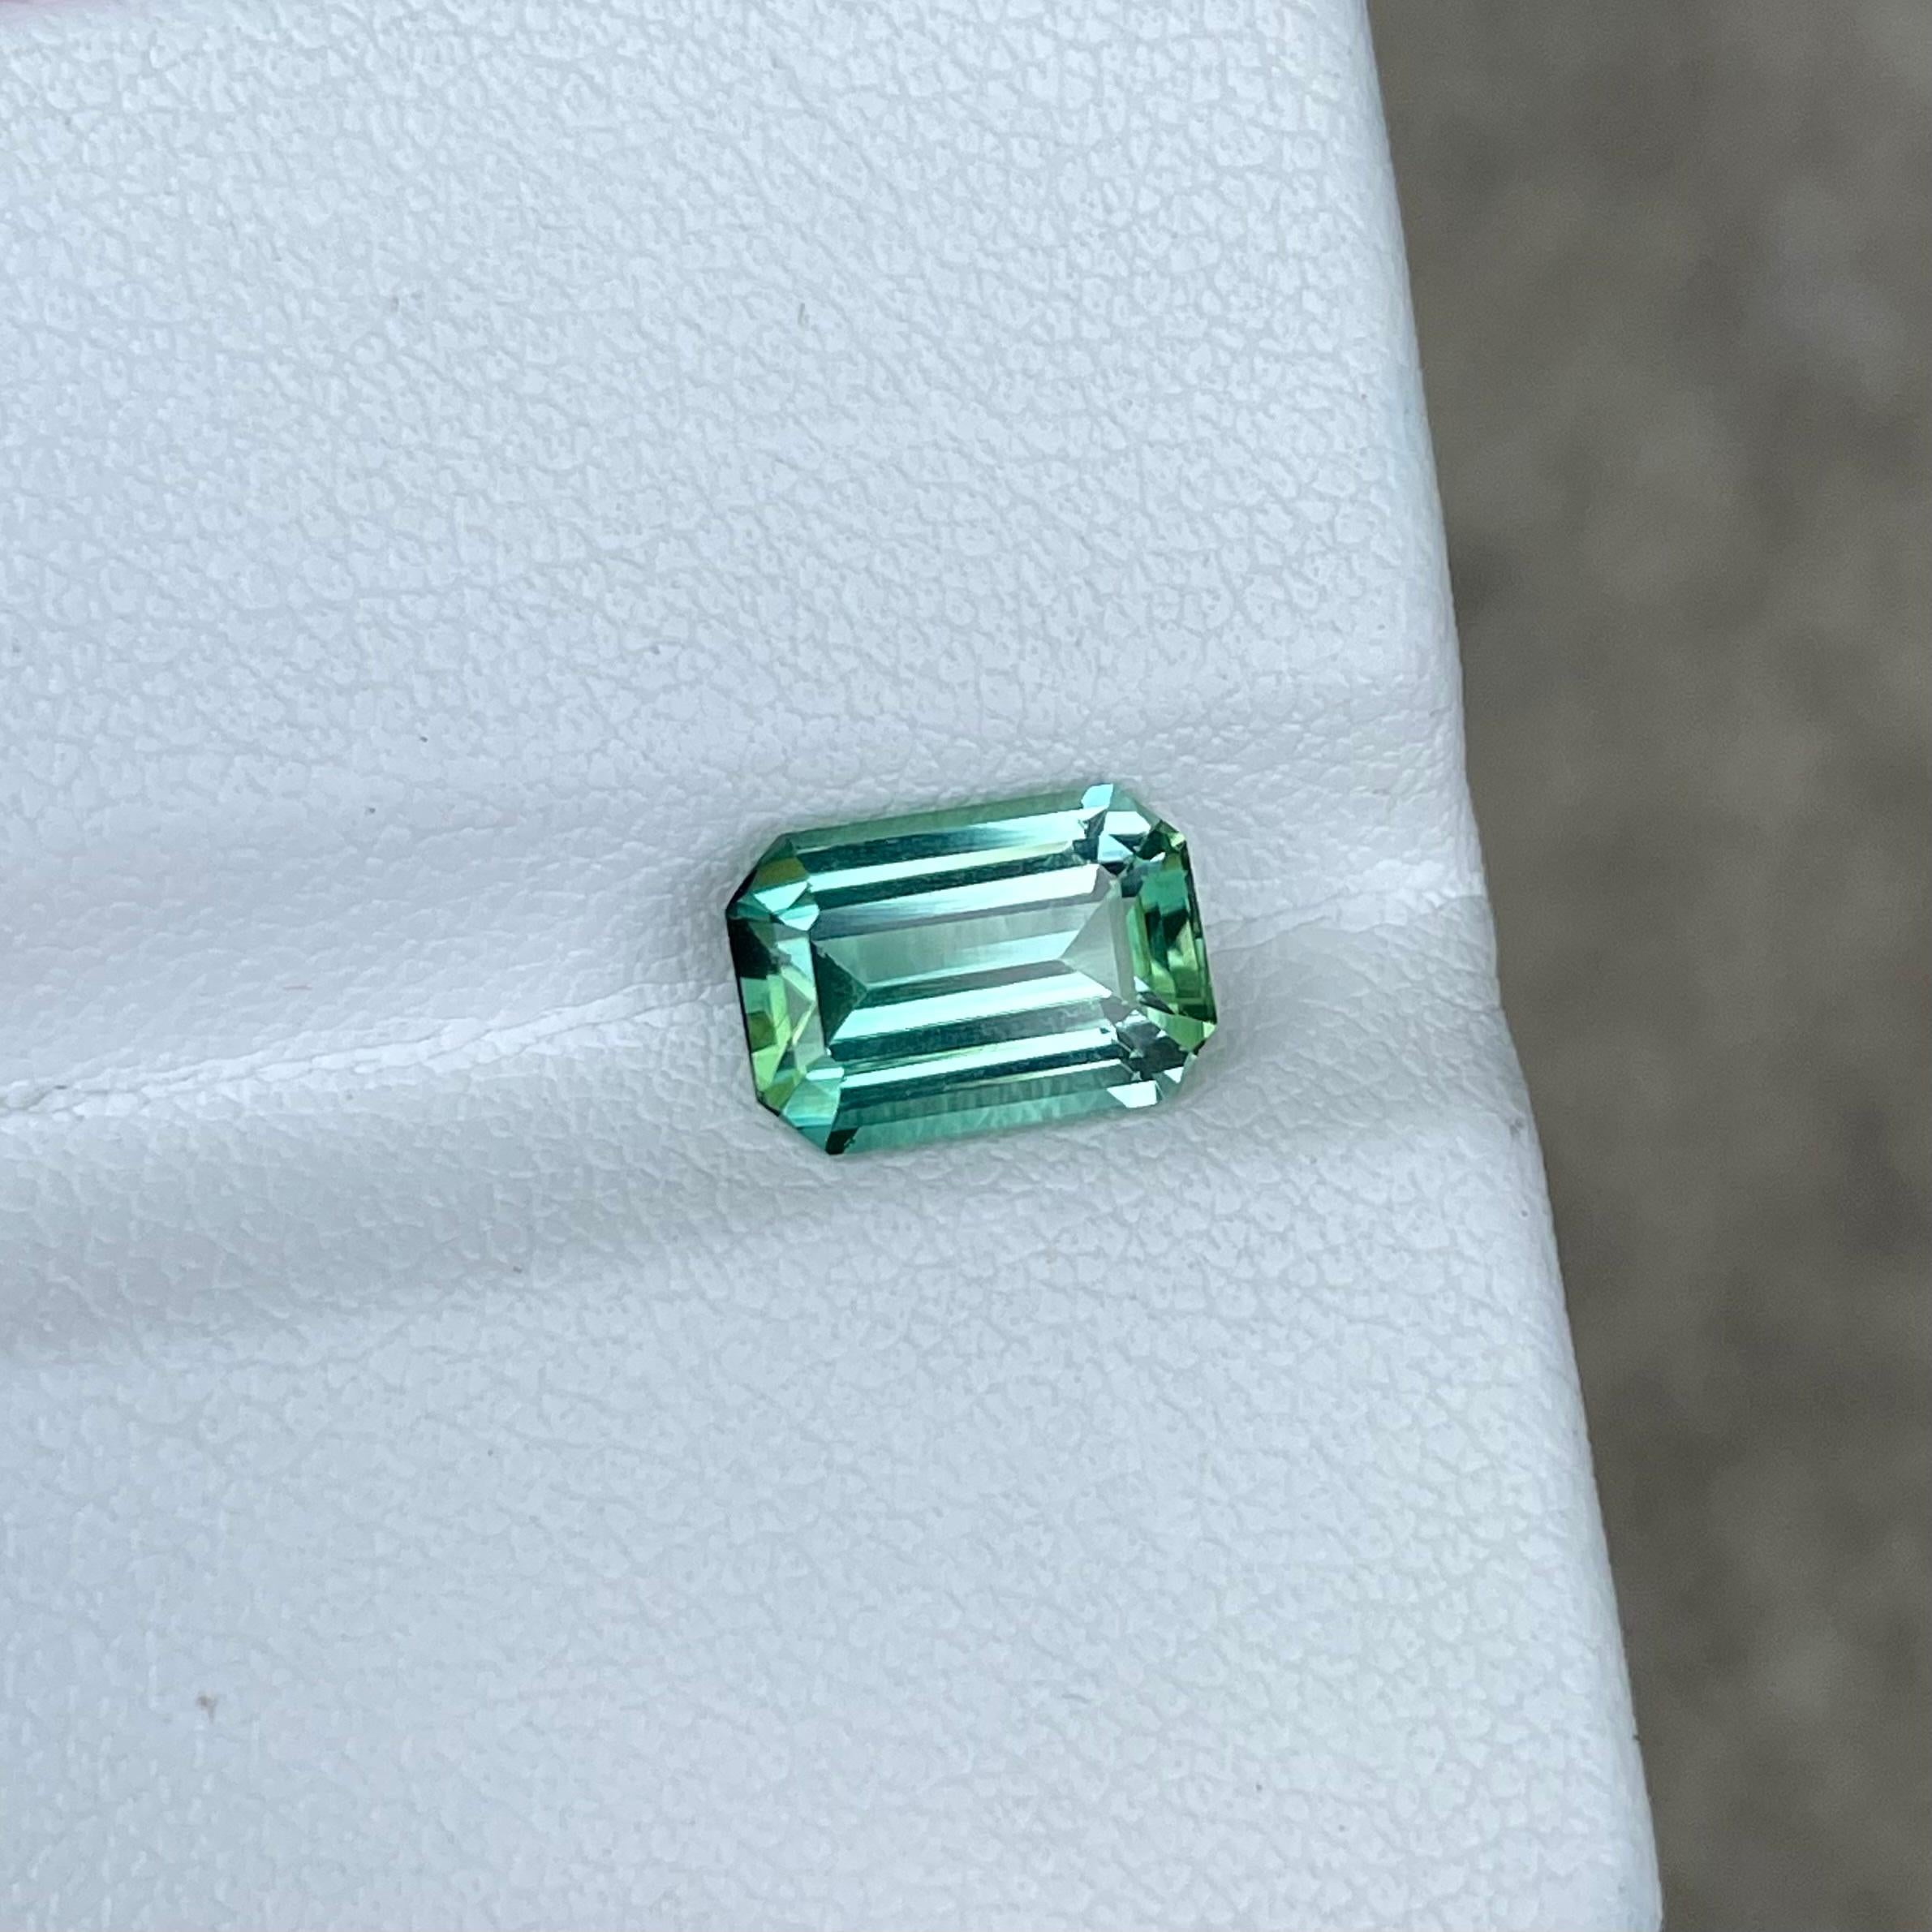 Weight : 2.05 carats 
Dimensions : 8.9x6.2x4.5 mm
Clarity : Eye Clean
Treatment : None
Origin : Afghanistan
Cut : Step Emerald 
Shape : Octagon




The 2.05-carat weight adds substance to its visual appeal, making it a statement piece for those who